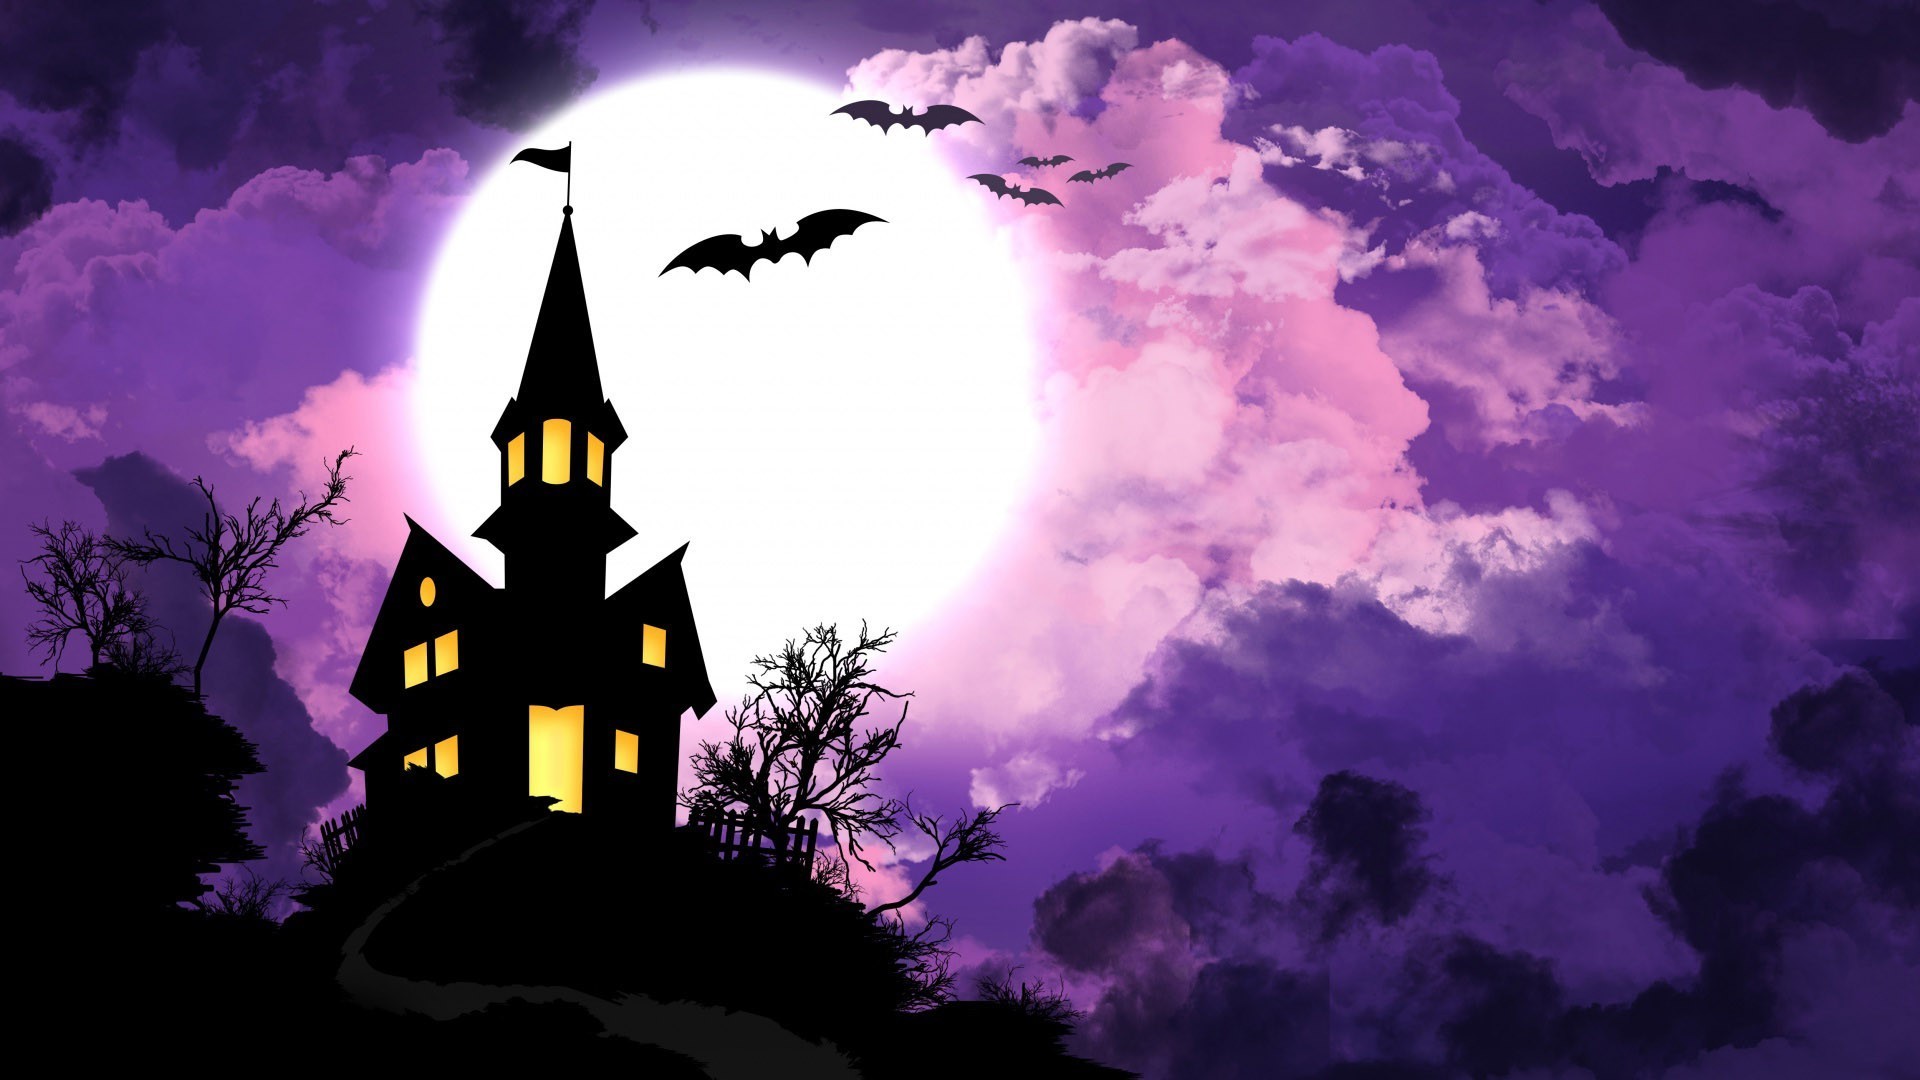 1920x1080 background hd halloween theme ; Pictures-images-halloween-backgrounds- wallpapers